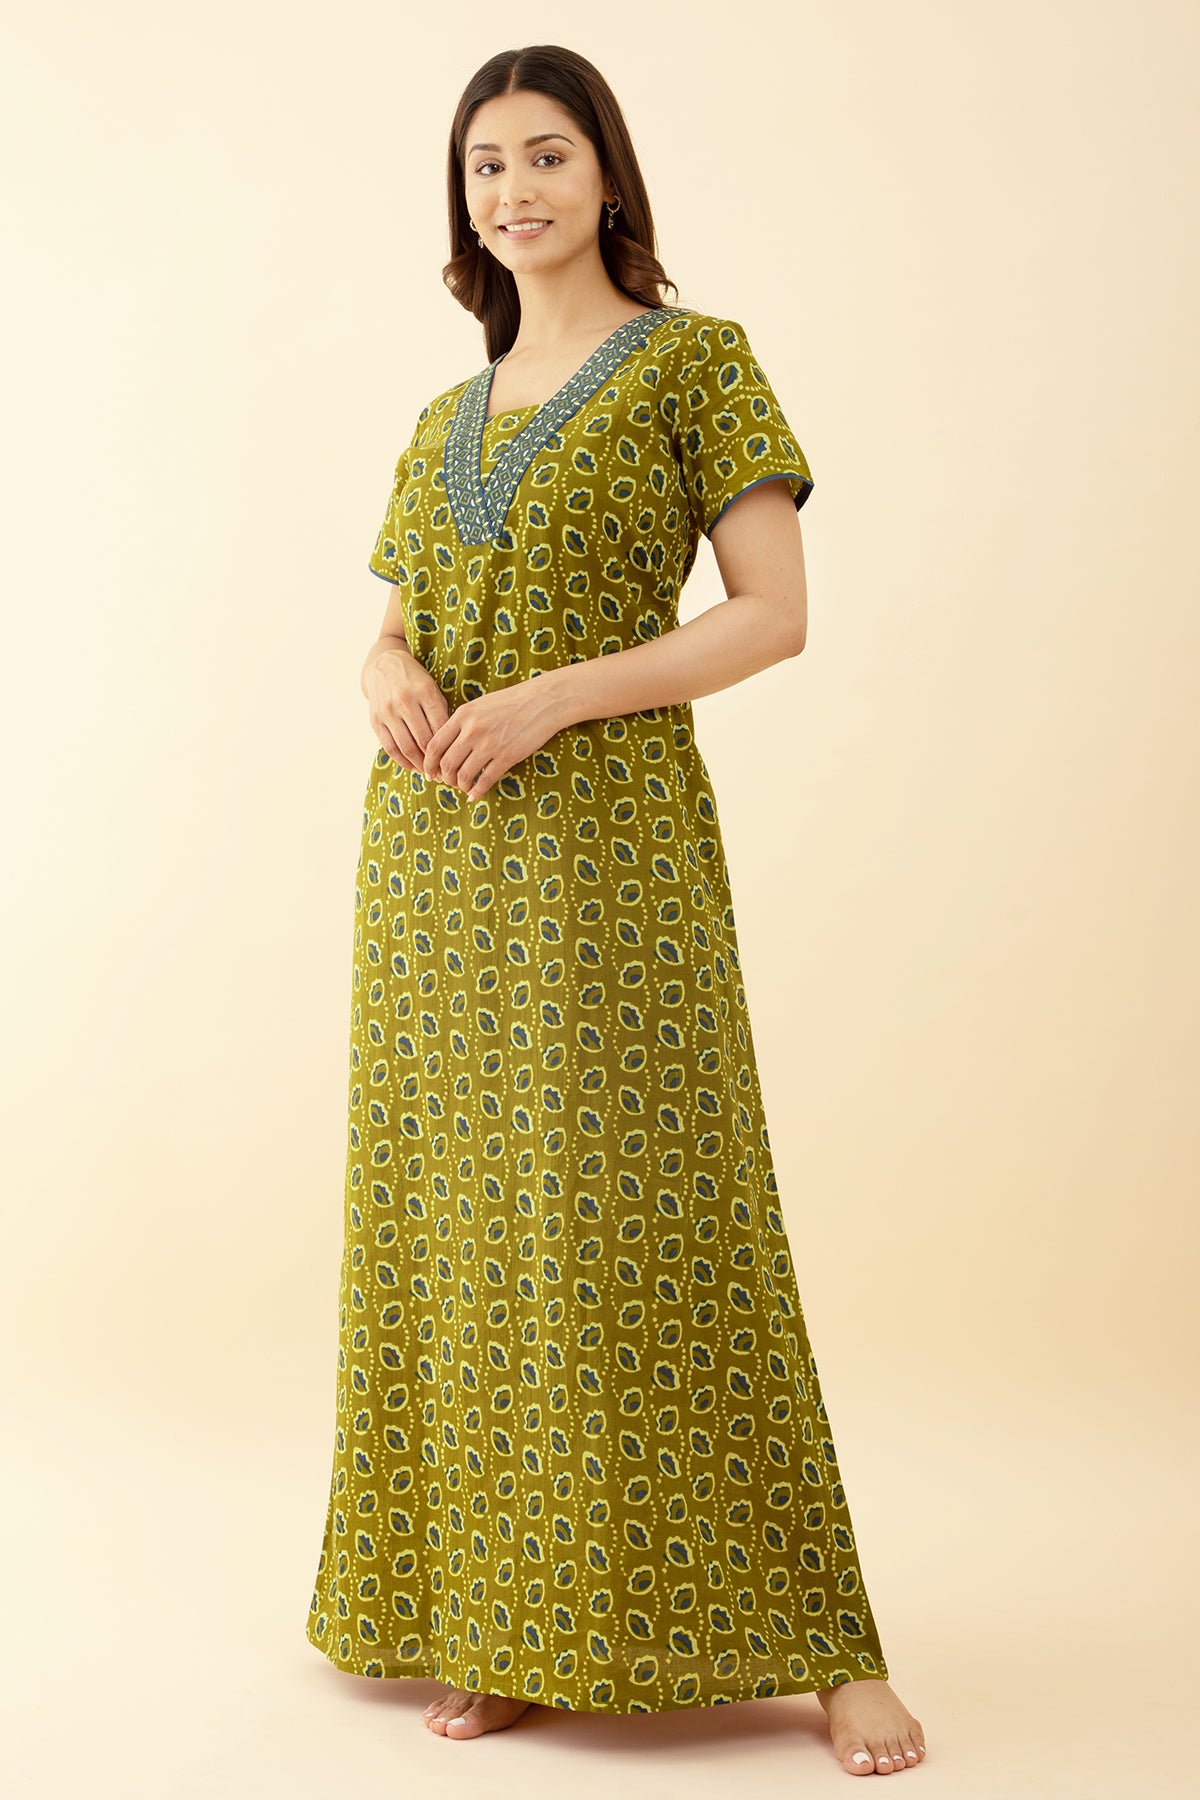 Floral Printed Embroidered Green V-Neck Nighty